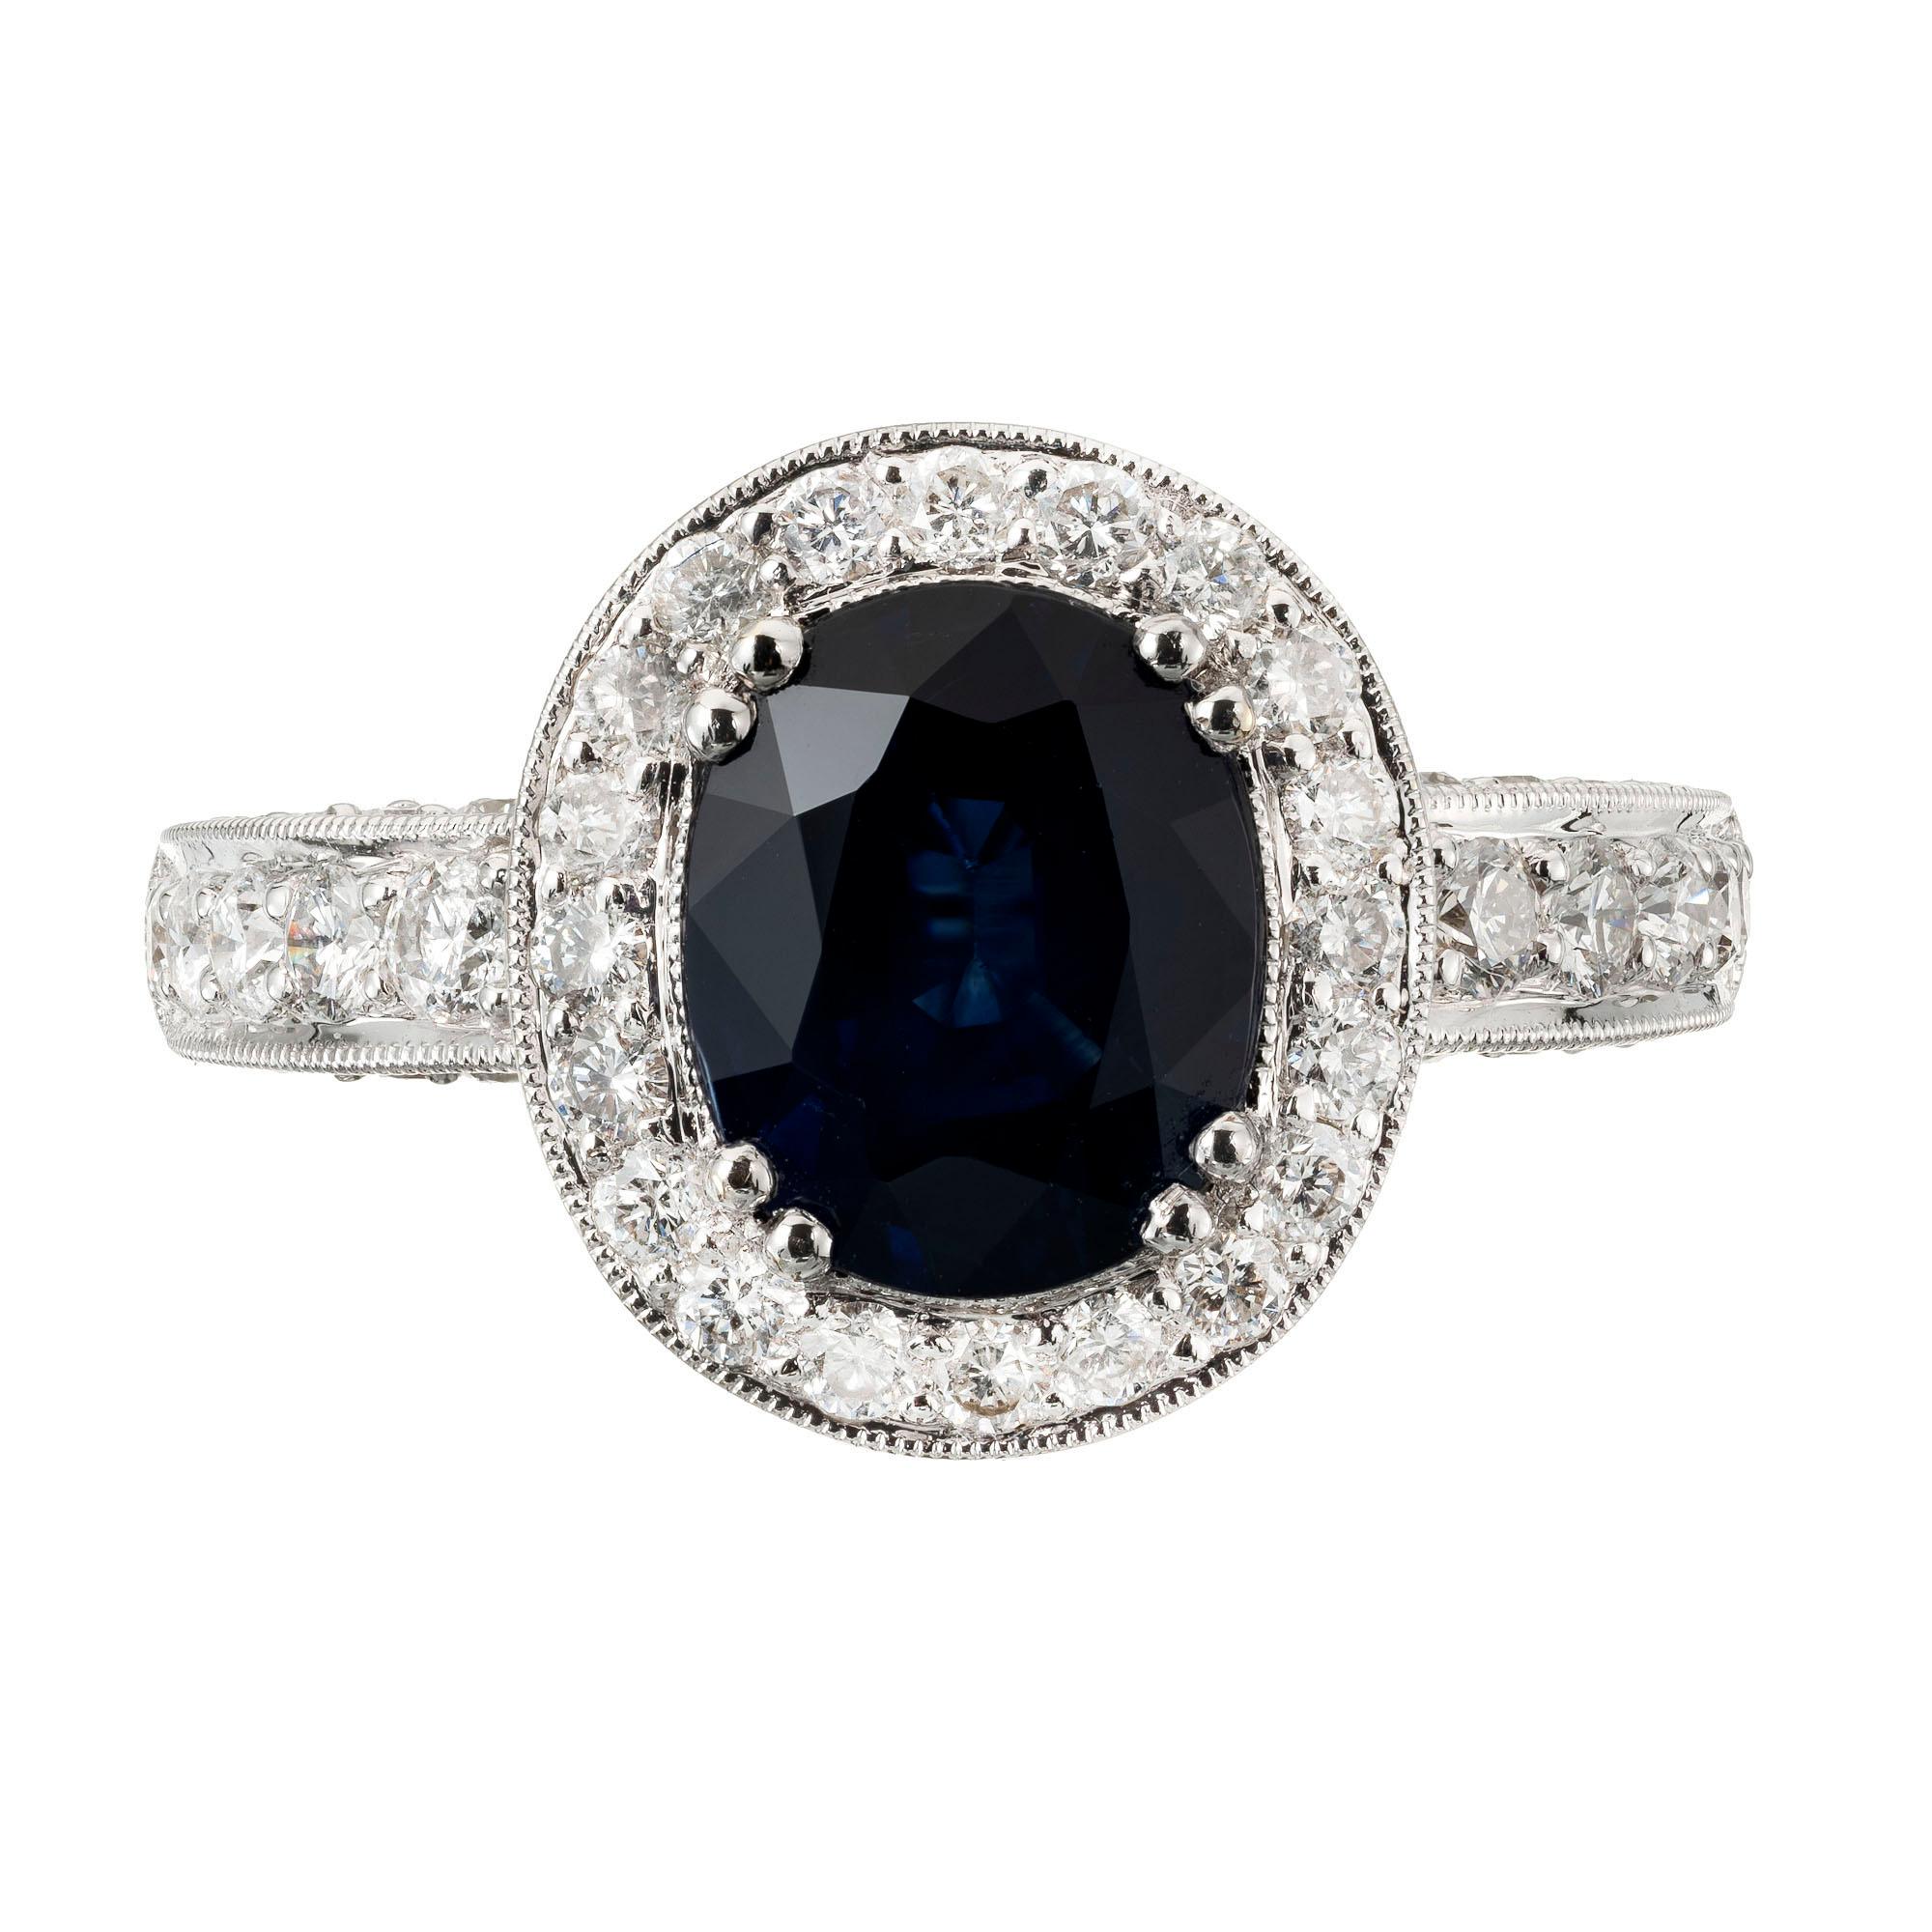 Oval Royal blue Sapphire diamond halo engagement ring. Oval natural sapphire center stone, GIA certified, with a halo of bright white brilliant diamonds. 

1 oval blue natural Sapphire approx. total weight 3.48cts,GIA certificate #1176784762
49